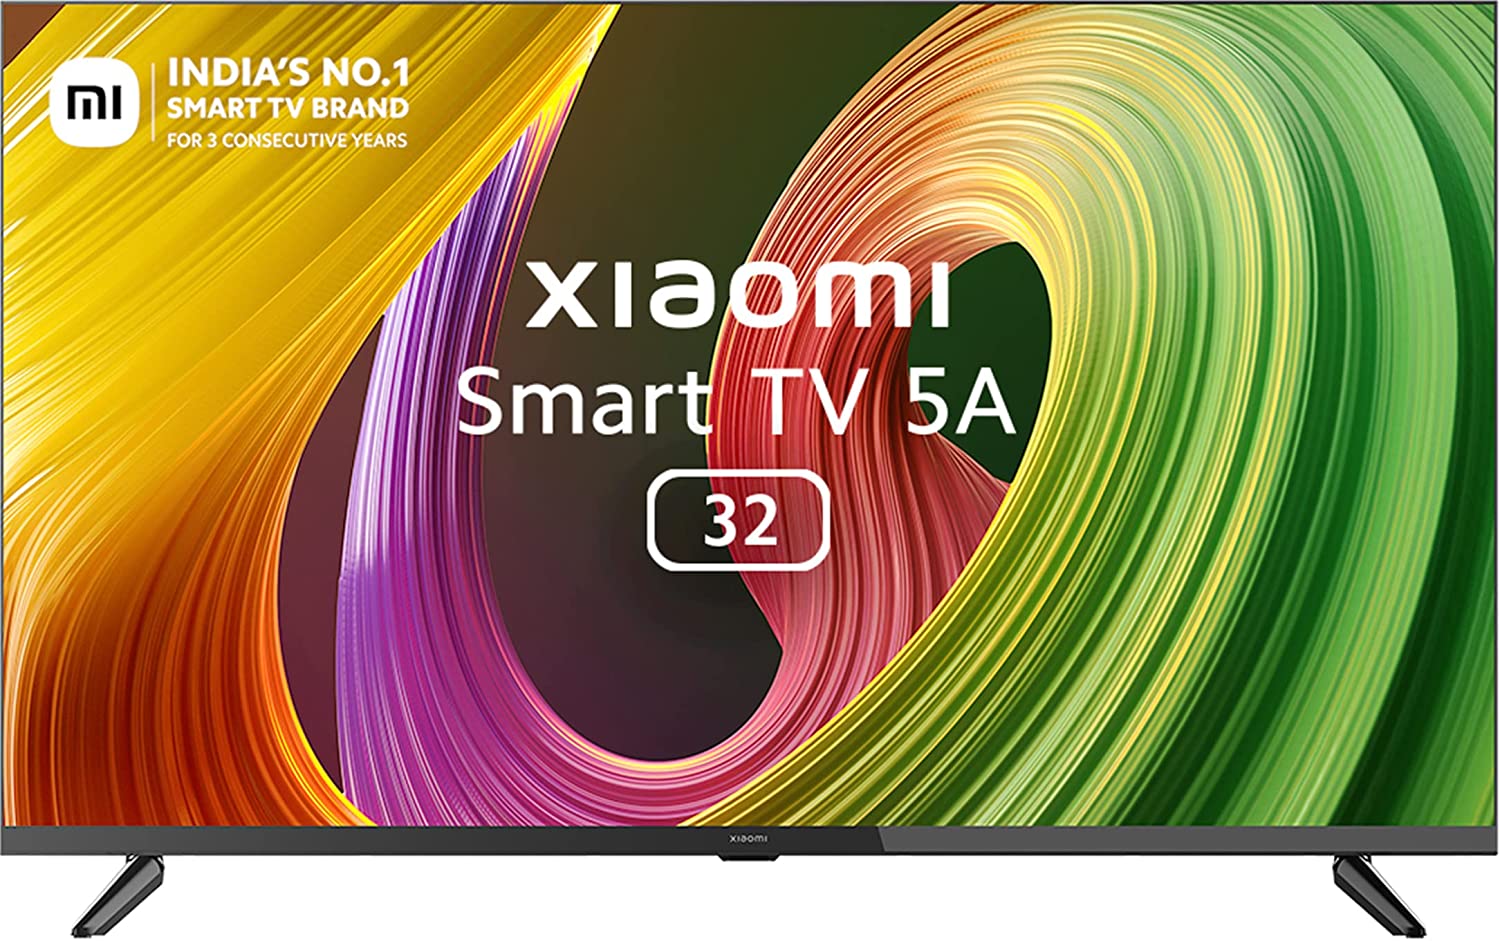 Xiaomi 32 inches Smart LED TV